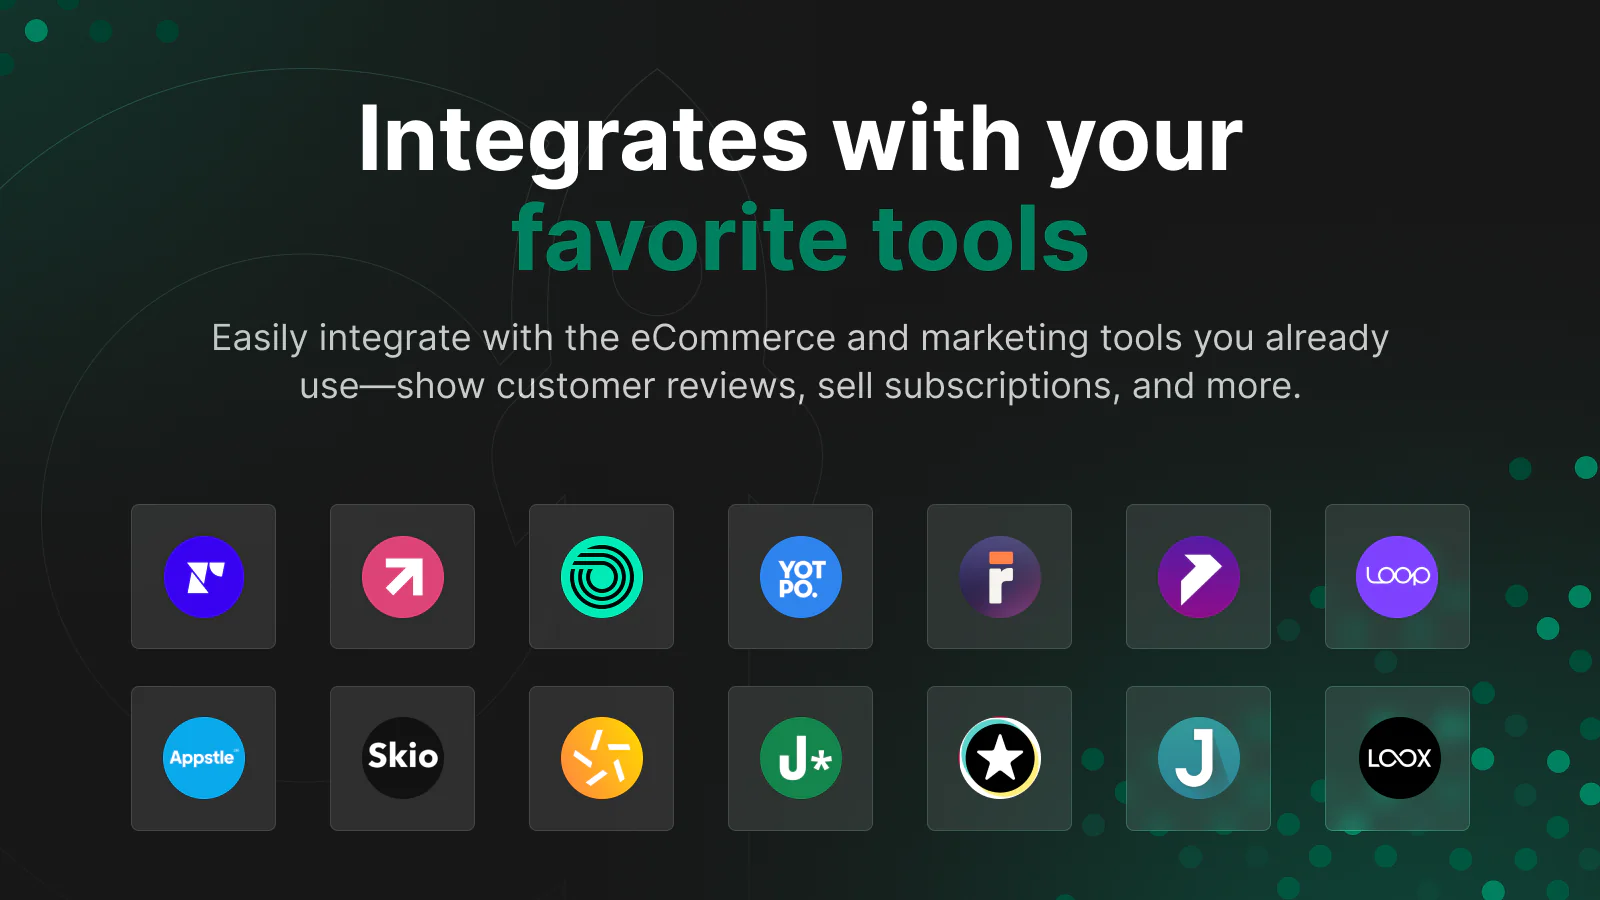 the image shows that this app can integrate with your favorite tools